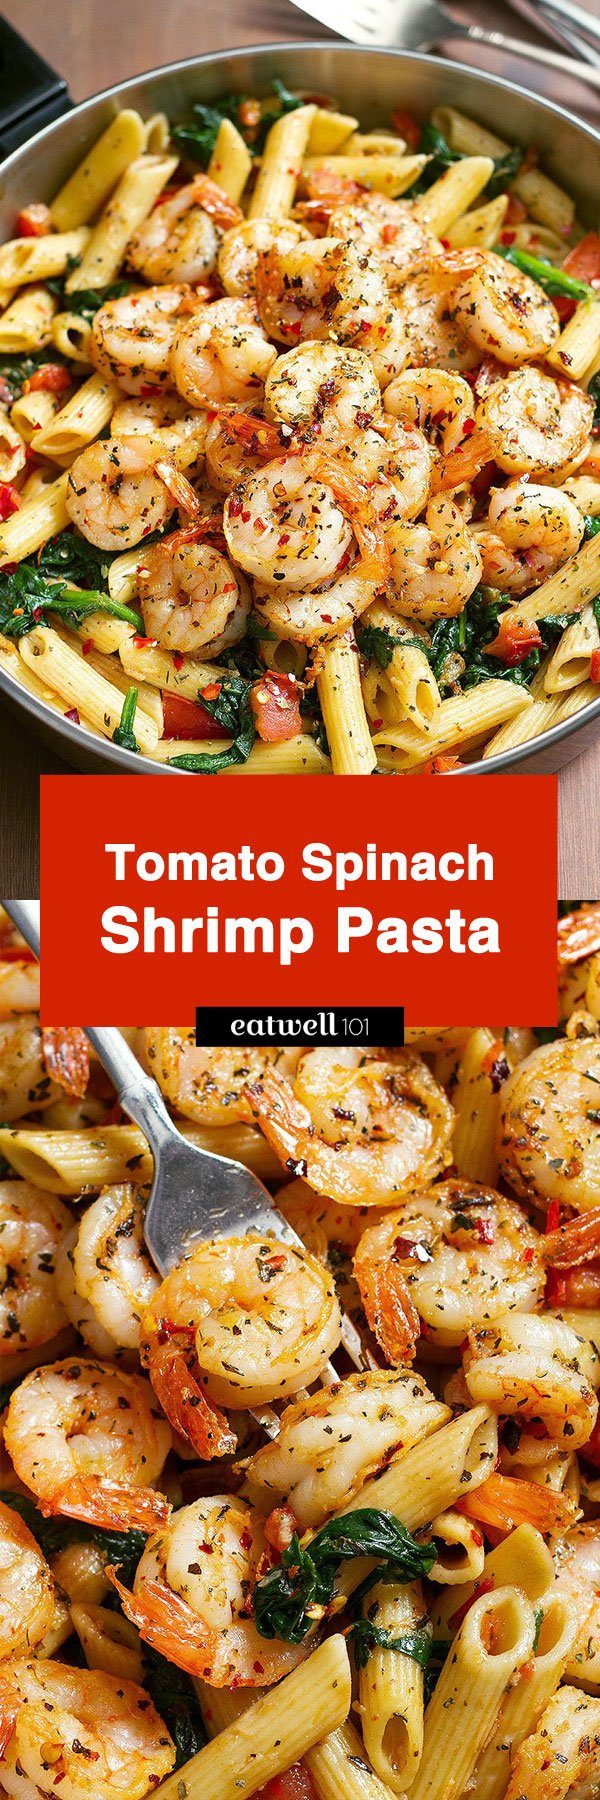 Shrimp Pasta Recipe – #shrimp #recipe #eatwell101 - Incredibly COMFORTING and just melt-in-your-mouth AMAZING! Loaded with tomatoes, spinach and basil.